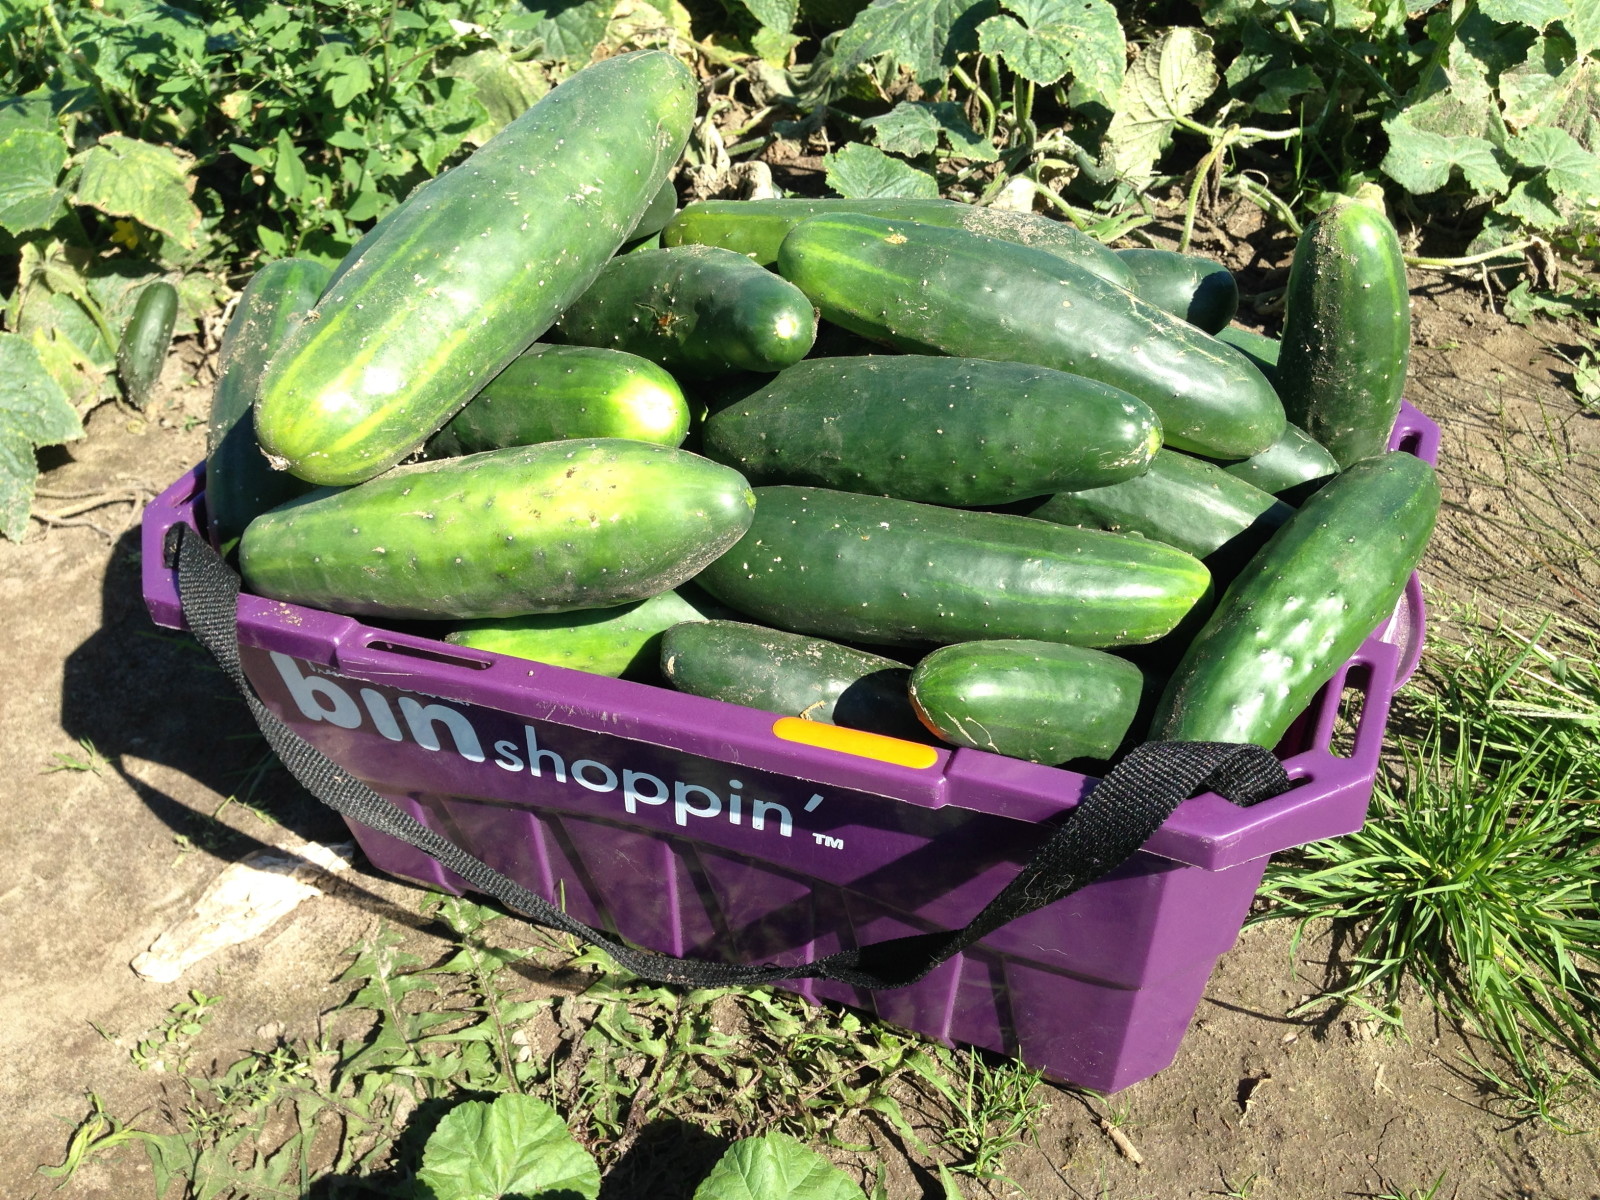 Overflowing with cucumbers